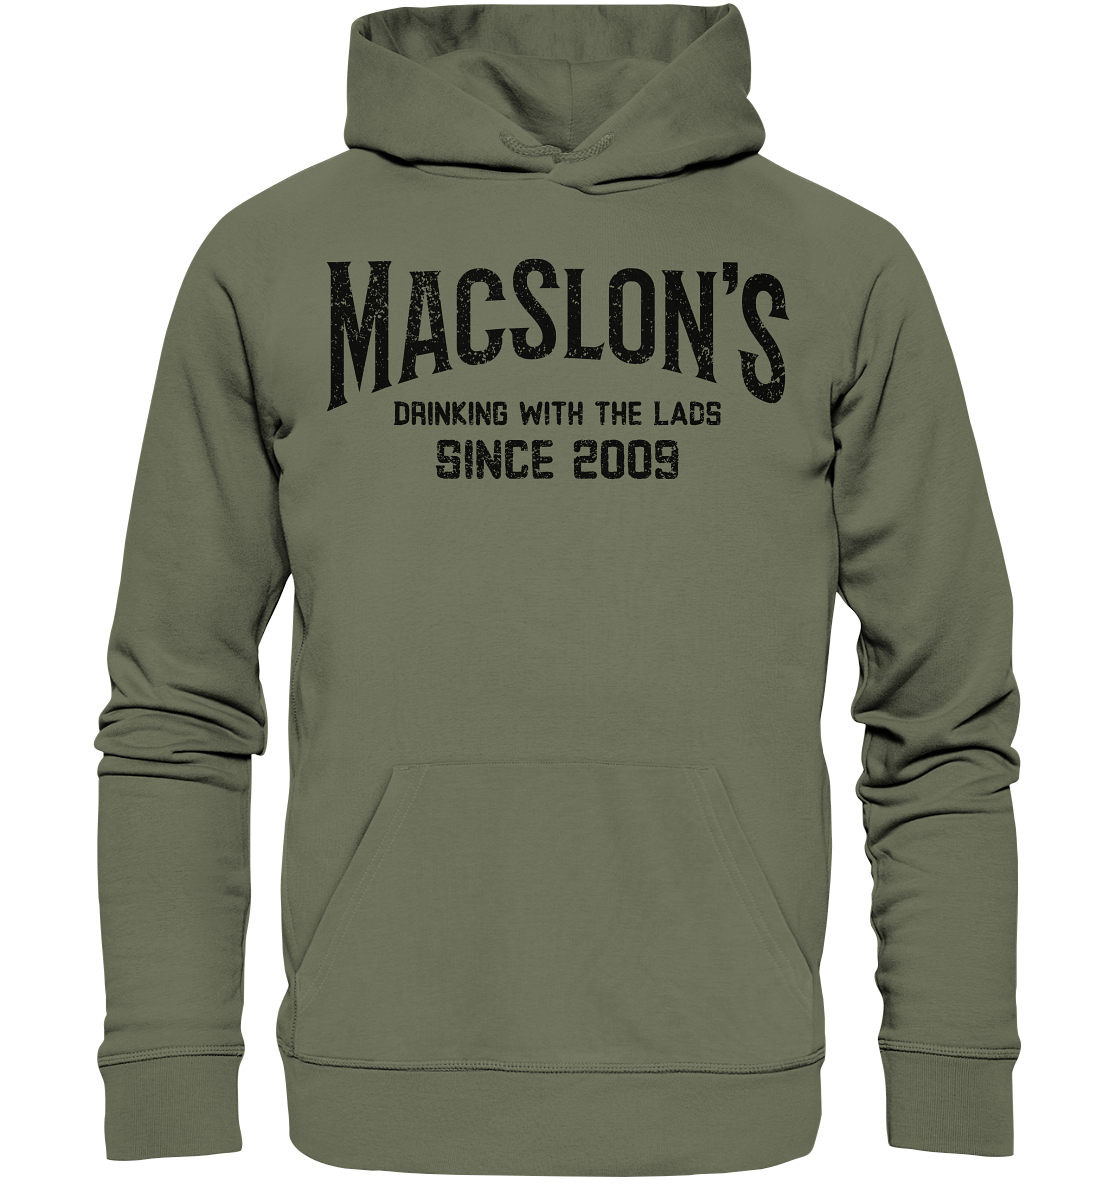 MacSlon's "Drinking With The Lads" - Premium Unisex Hoodie